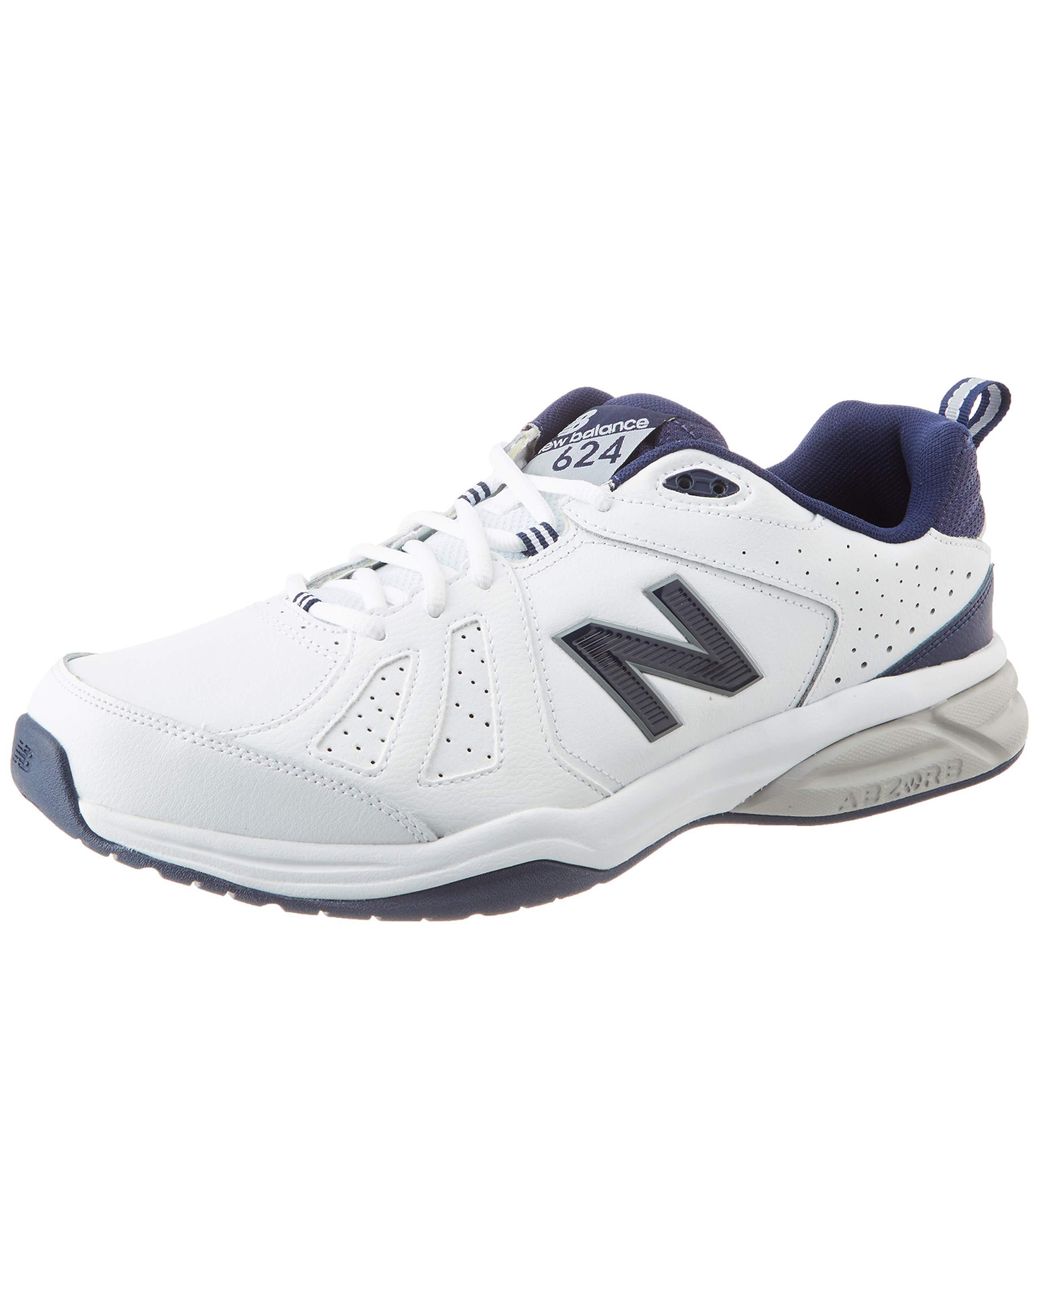 New Balance Leather 624v5 M Fitness Shoes in White White Navy White ...